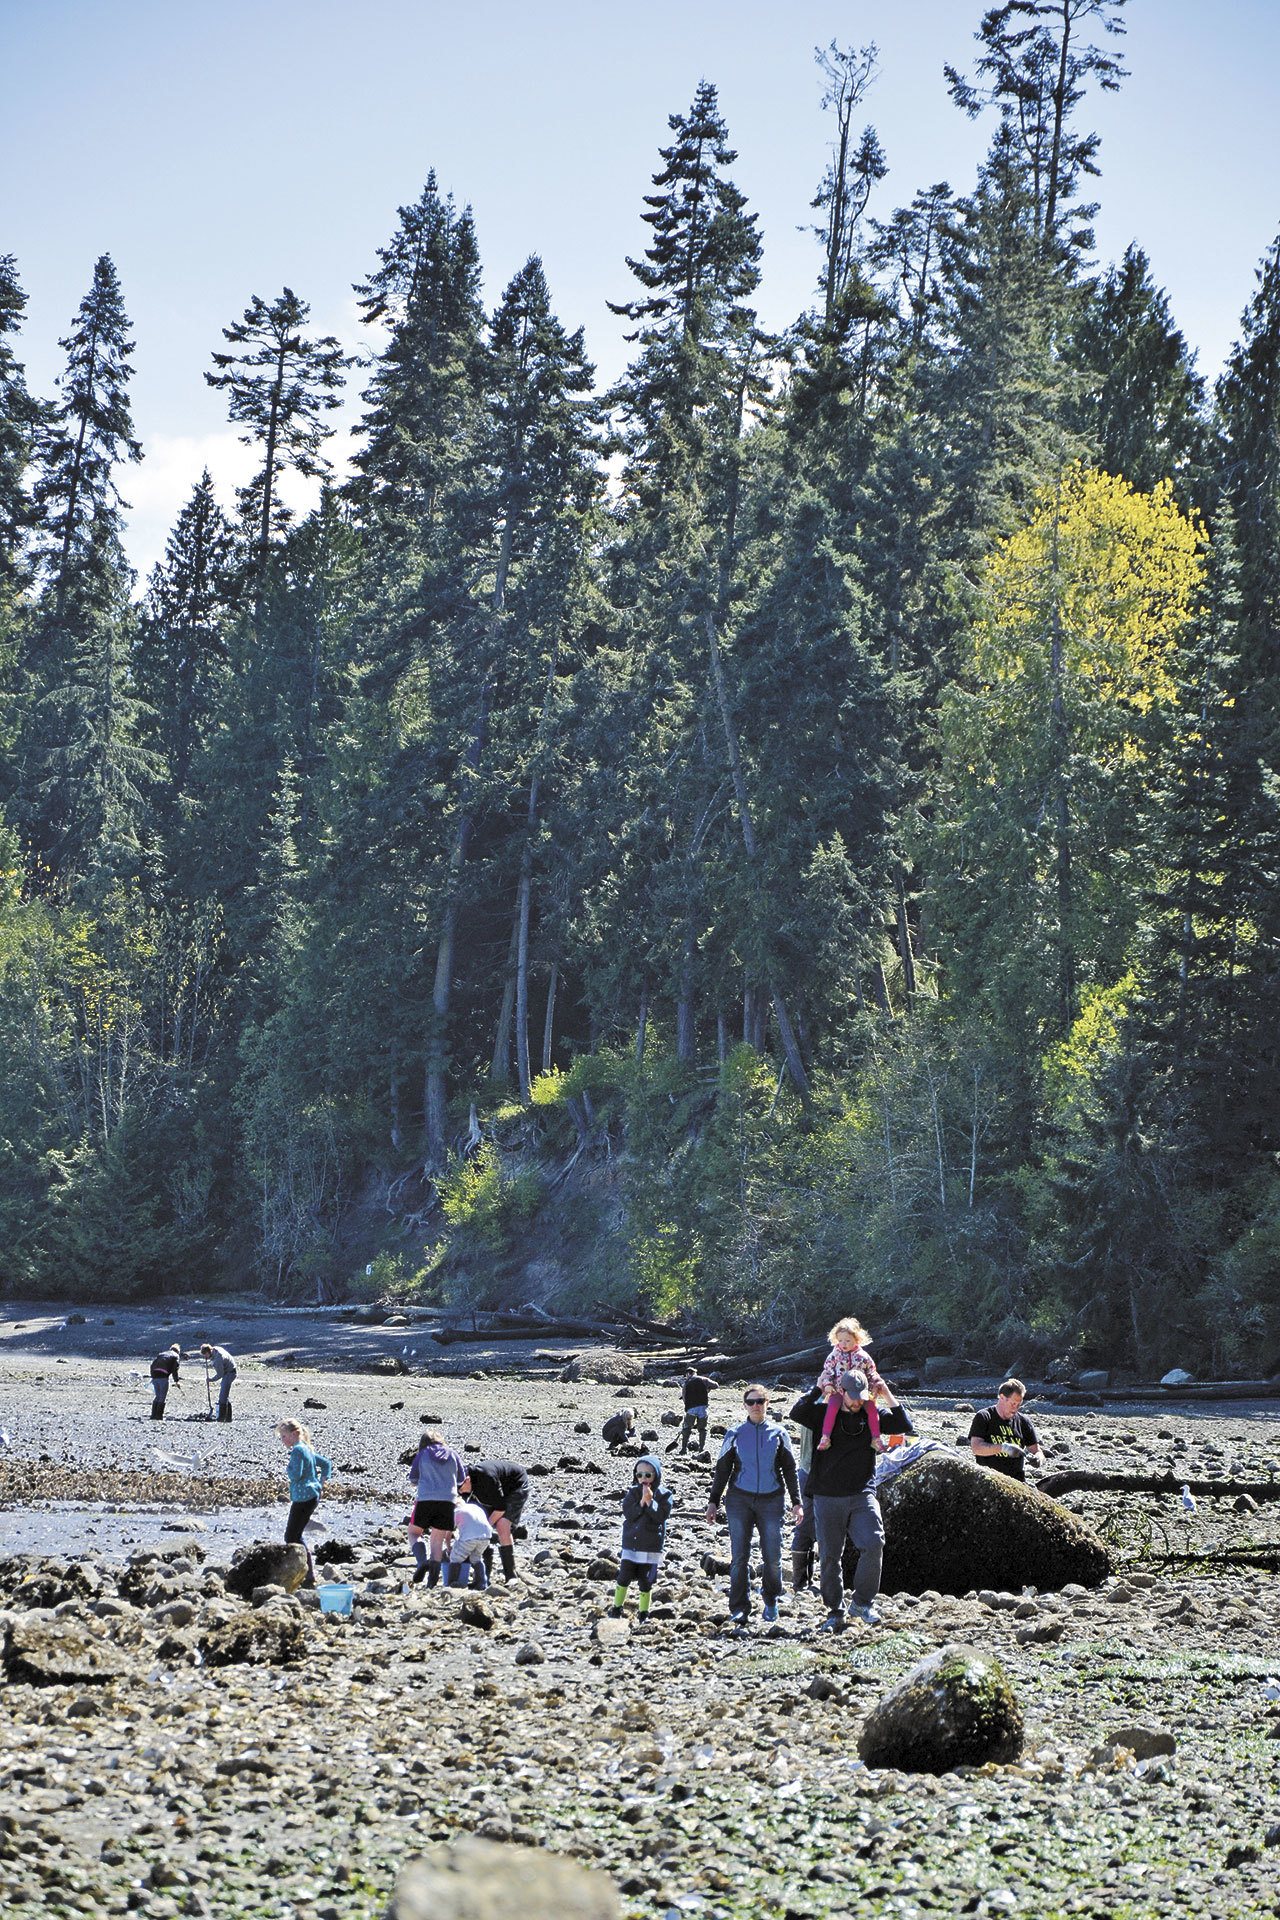 People take advantage of good weather and a low tide to harvest shellfish at Sequim Bay State Park in April. (Laura Lofgren/Peninsula Daily News)